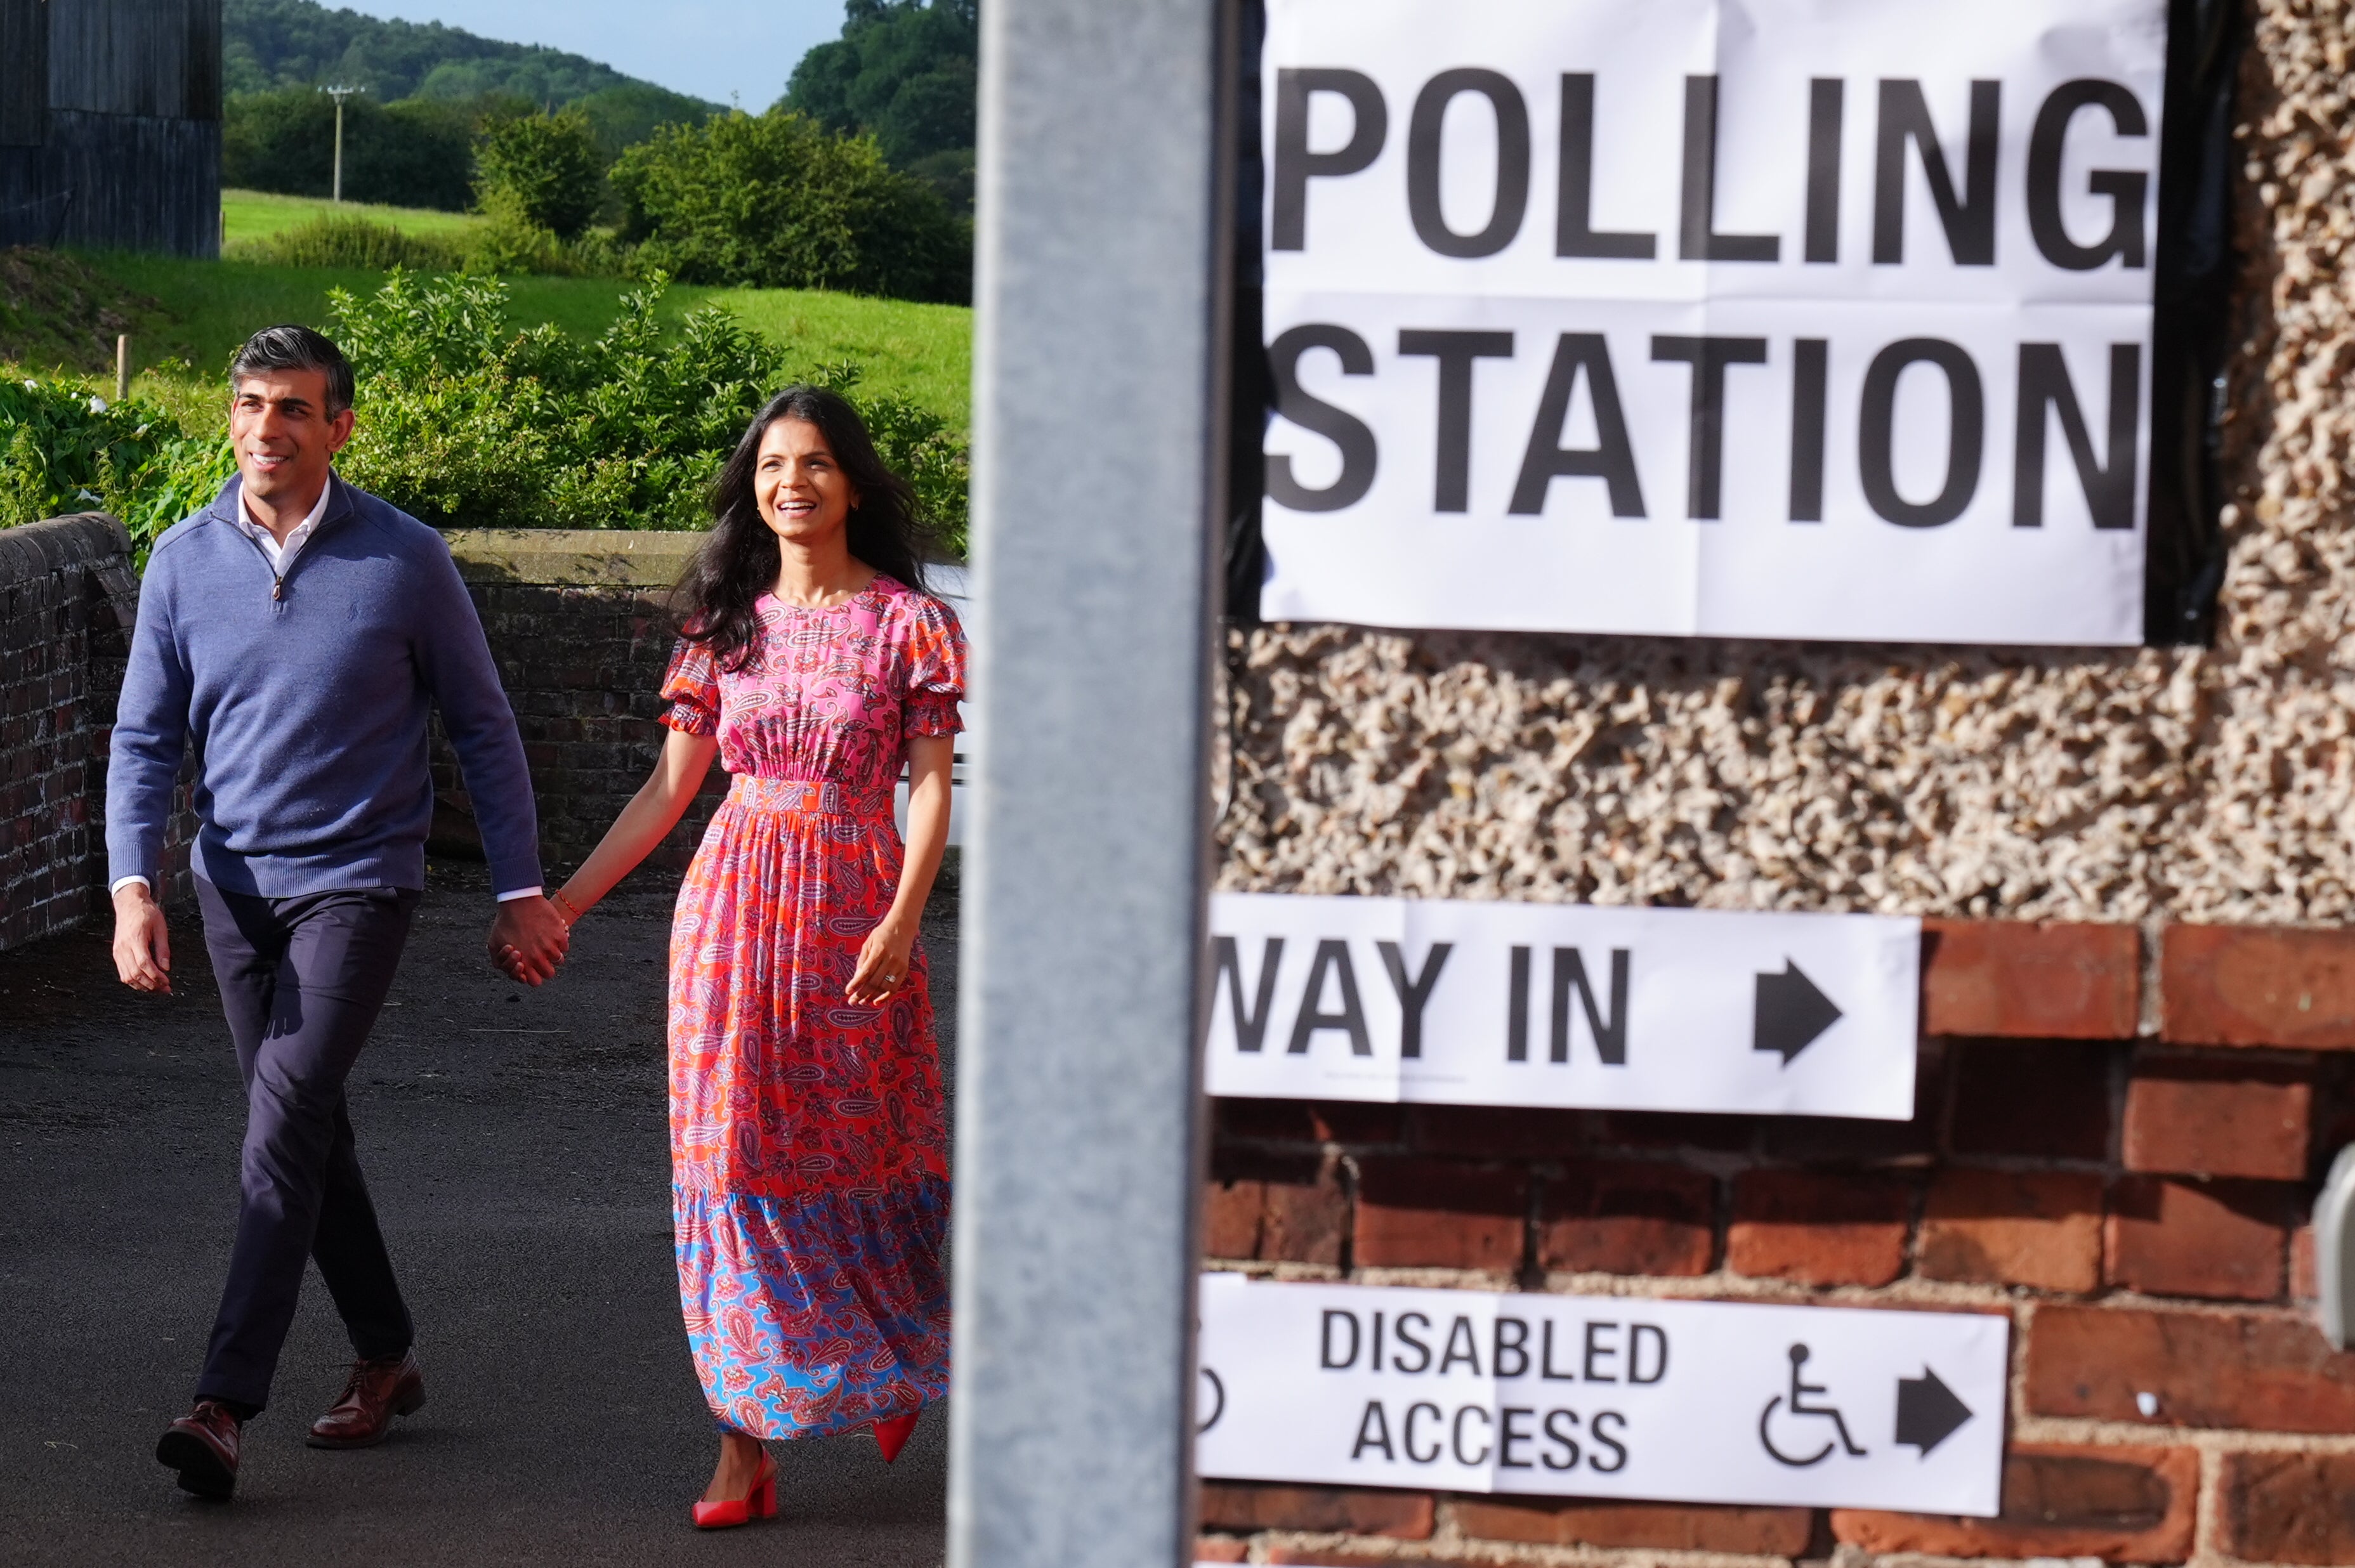 Prime Minister Rishi Sunak and his wife Akshata Murty arrive to cast their votes in Northallerton